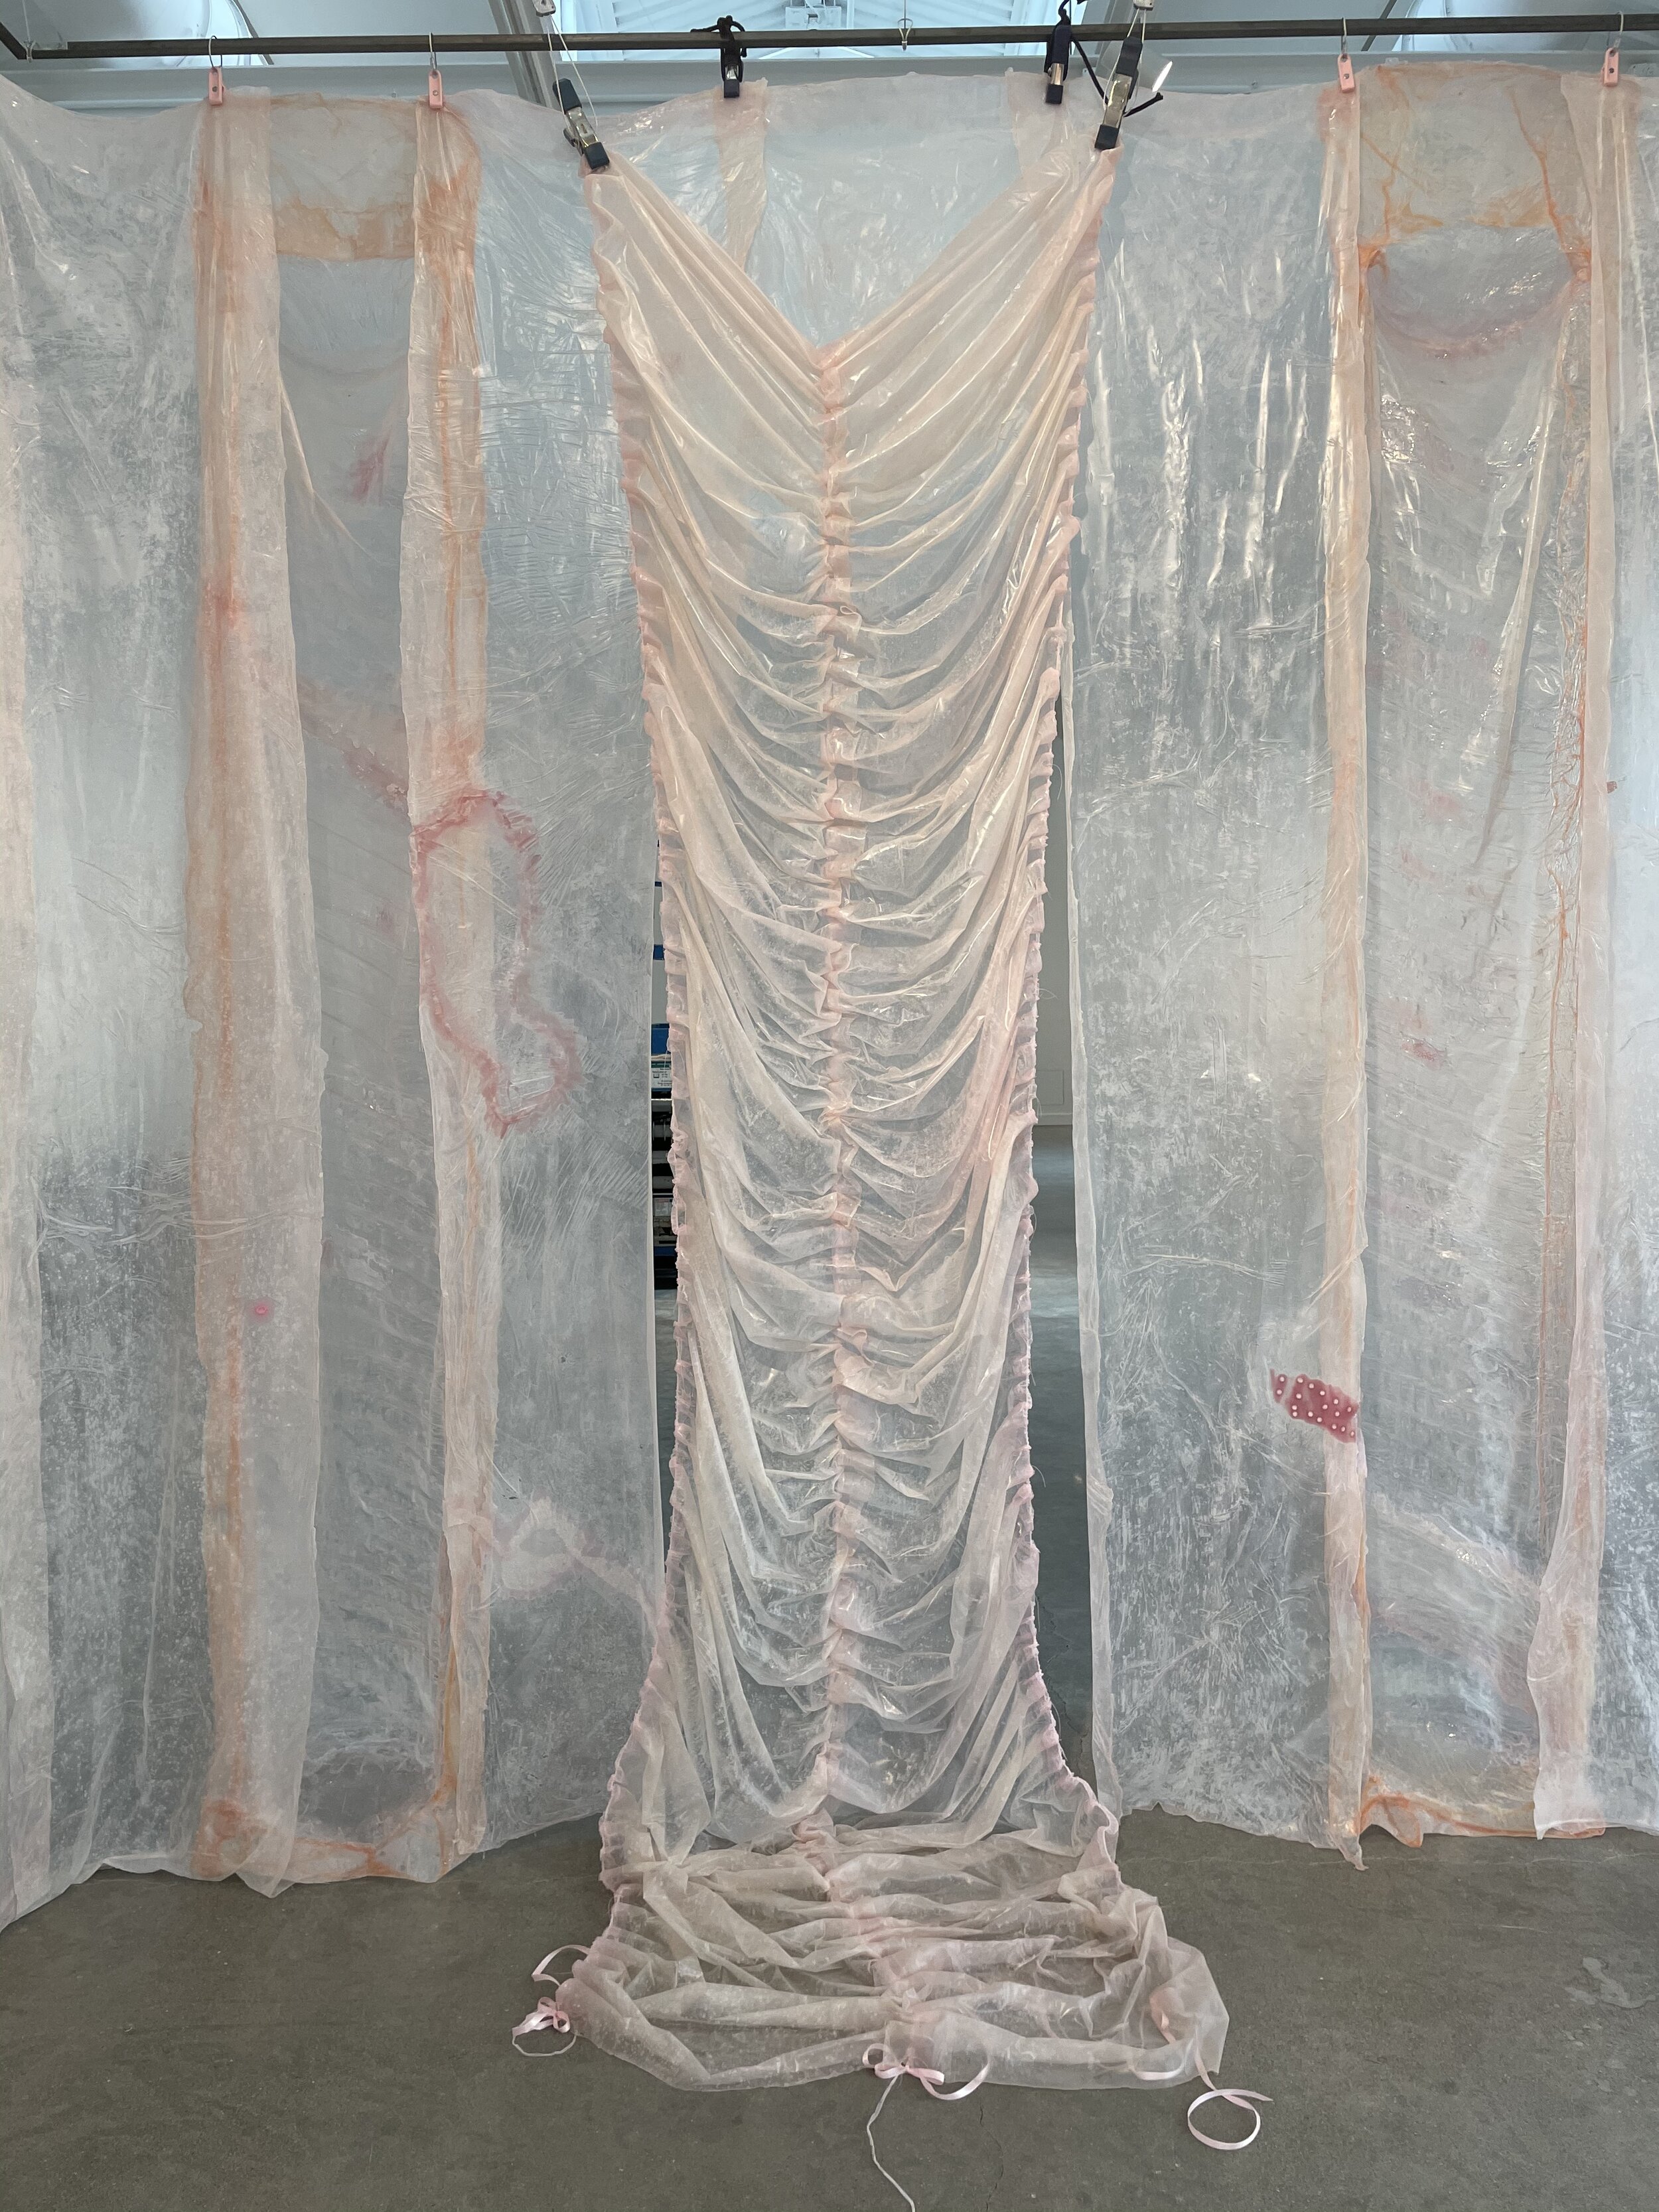  Karinne Smith  Pinky II , 2021  collagen film, flesh clamps, found bees, falsies, silicone, hair ties, baby powder, glass beads, found photograph, tulle dimensions variable to installation Installation view from ArtYard's inaugural exhibition  Girl 